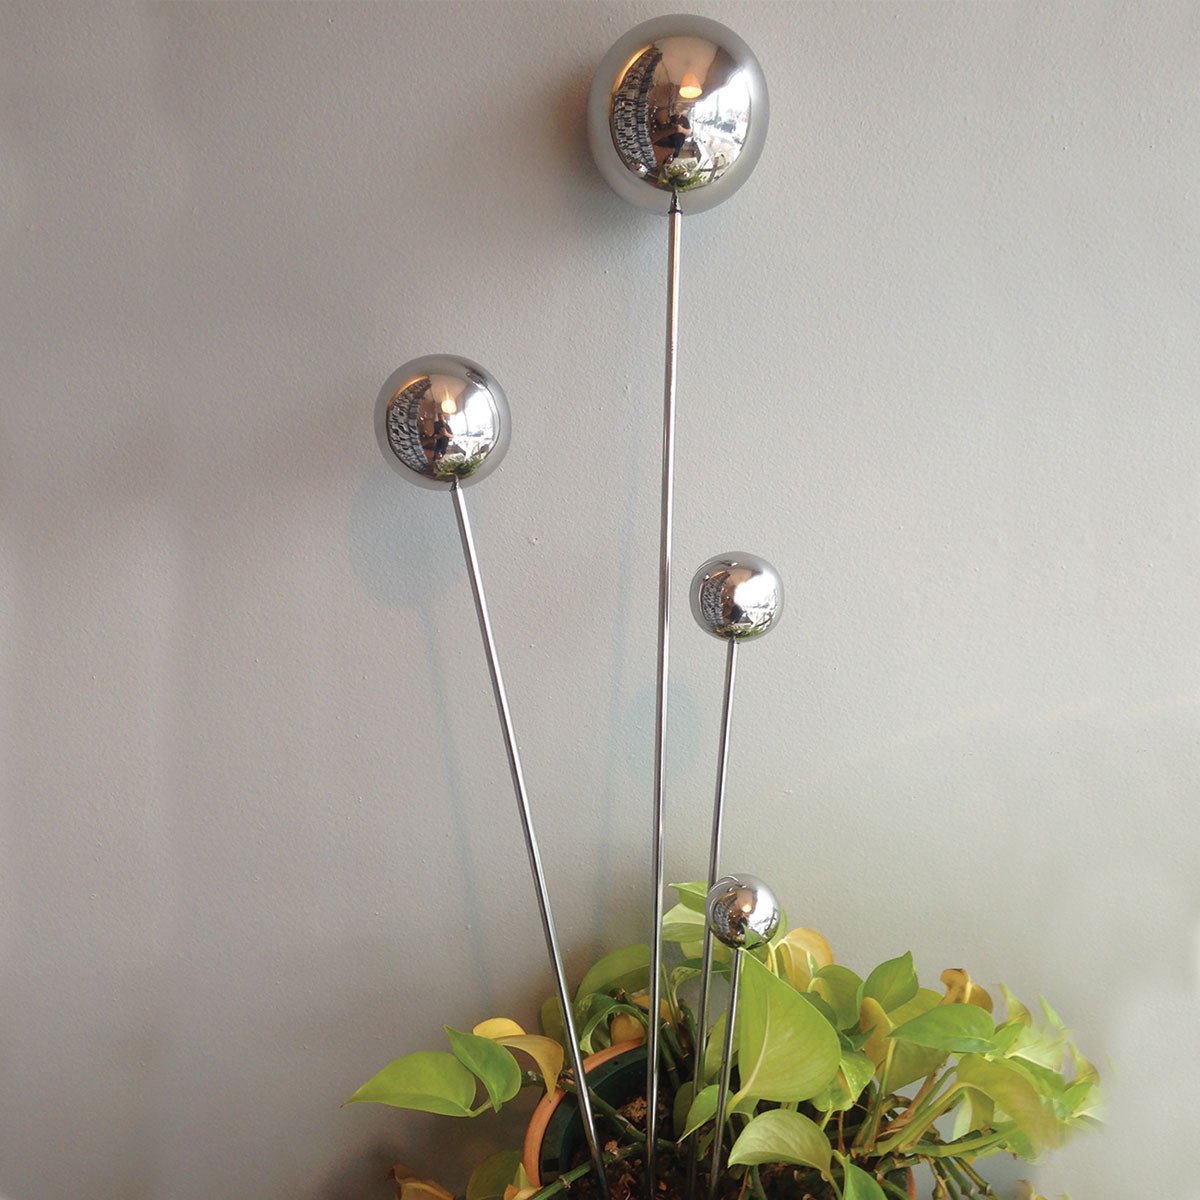 Large Stainless Steel Garden Lollipop Stakes, Rome #717